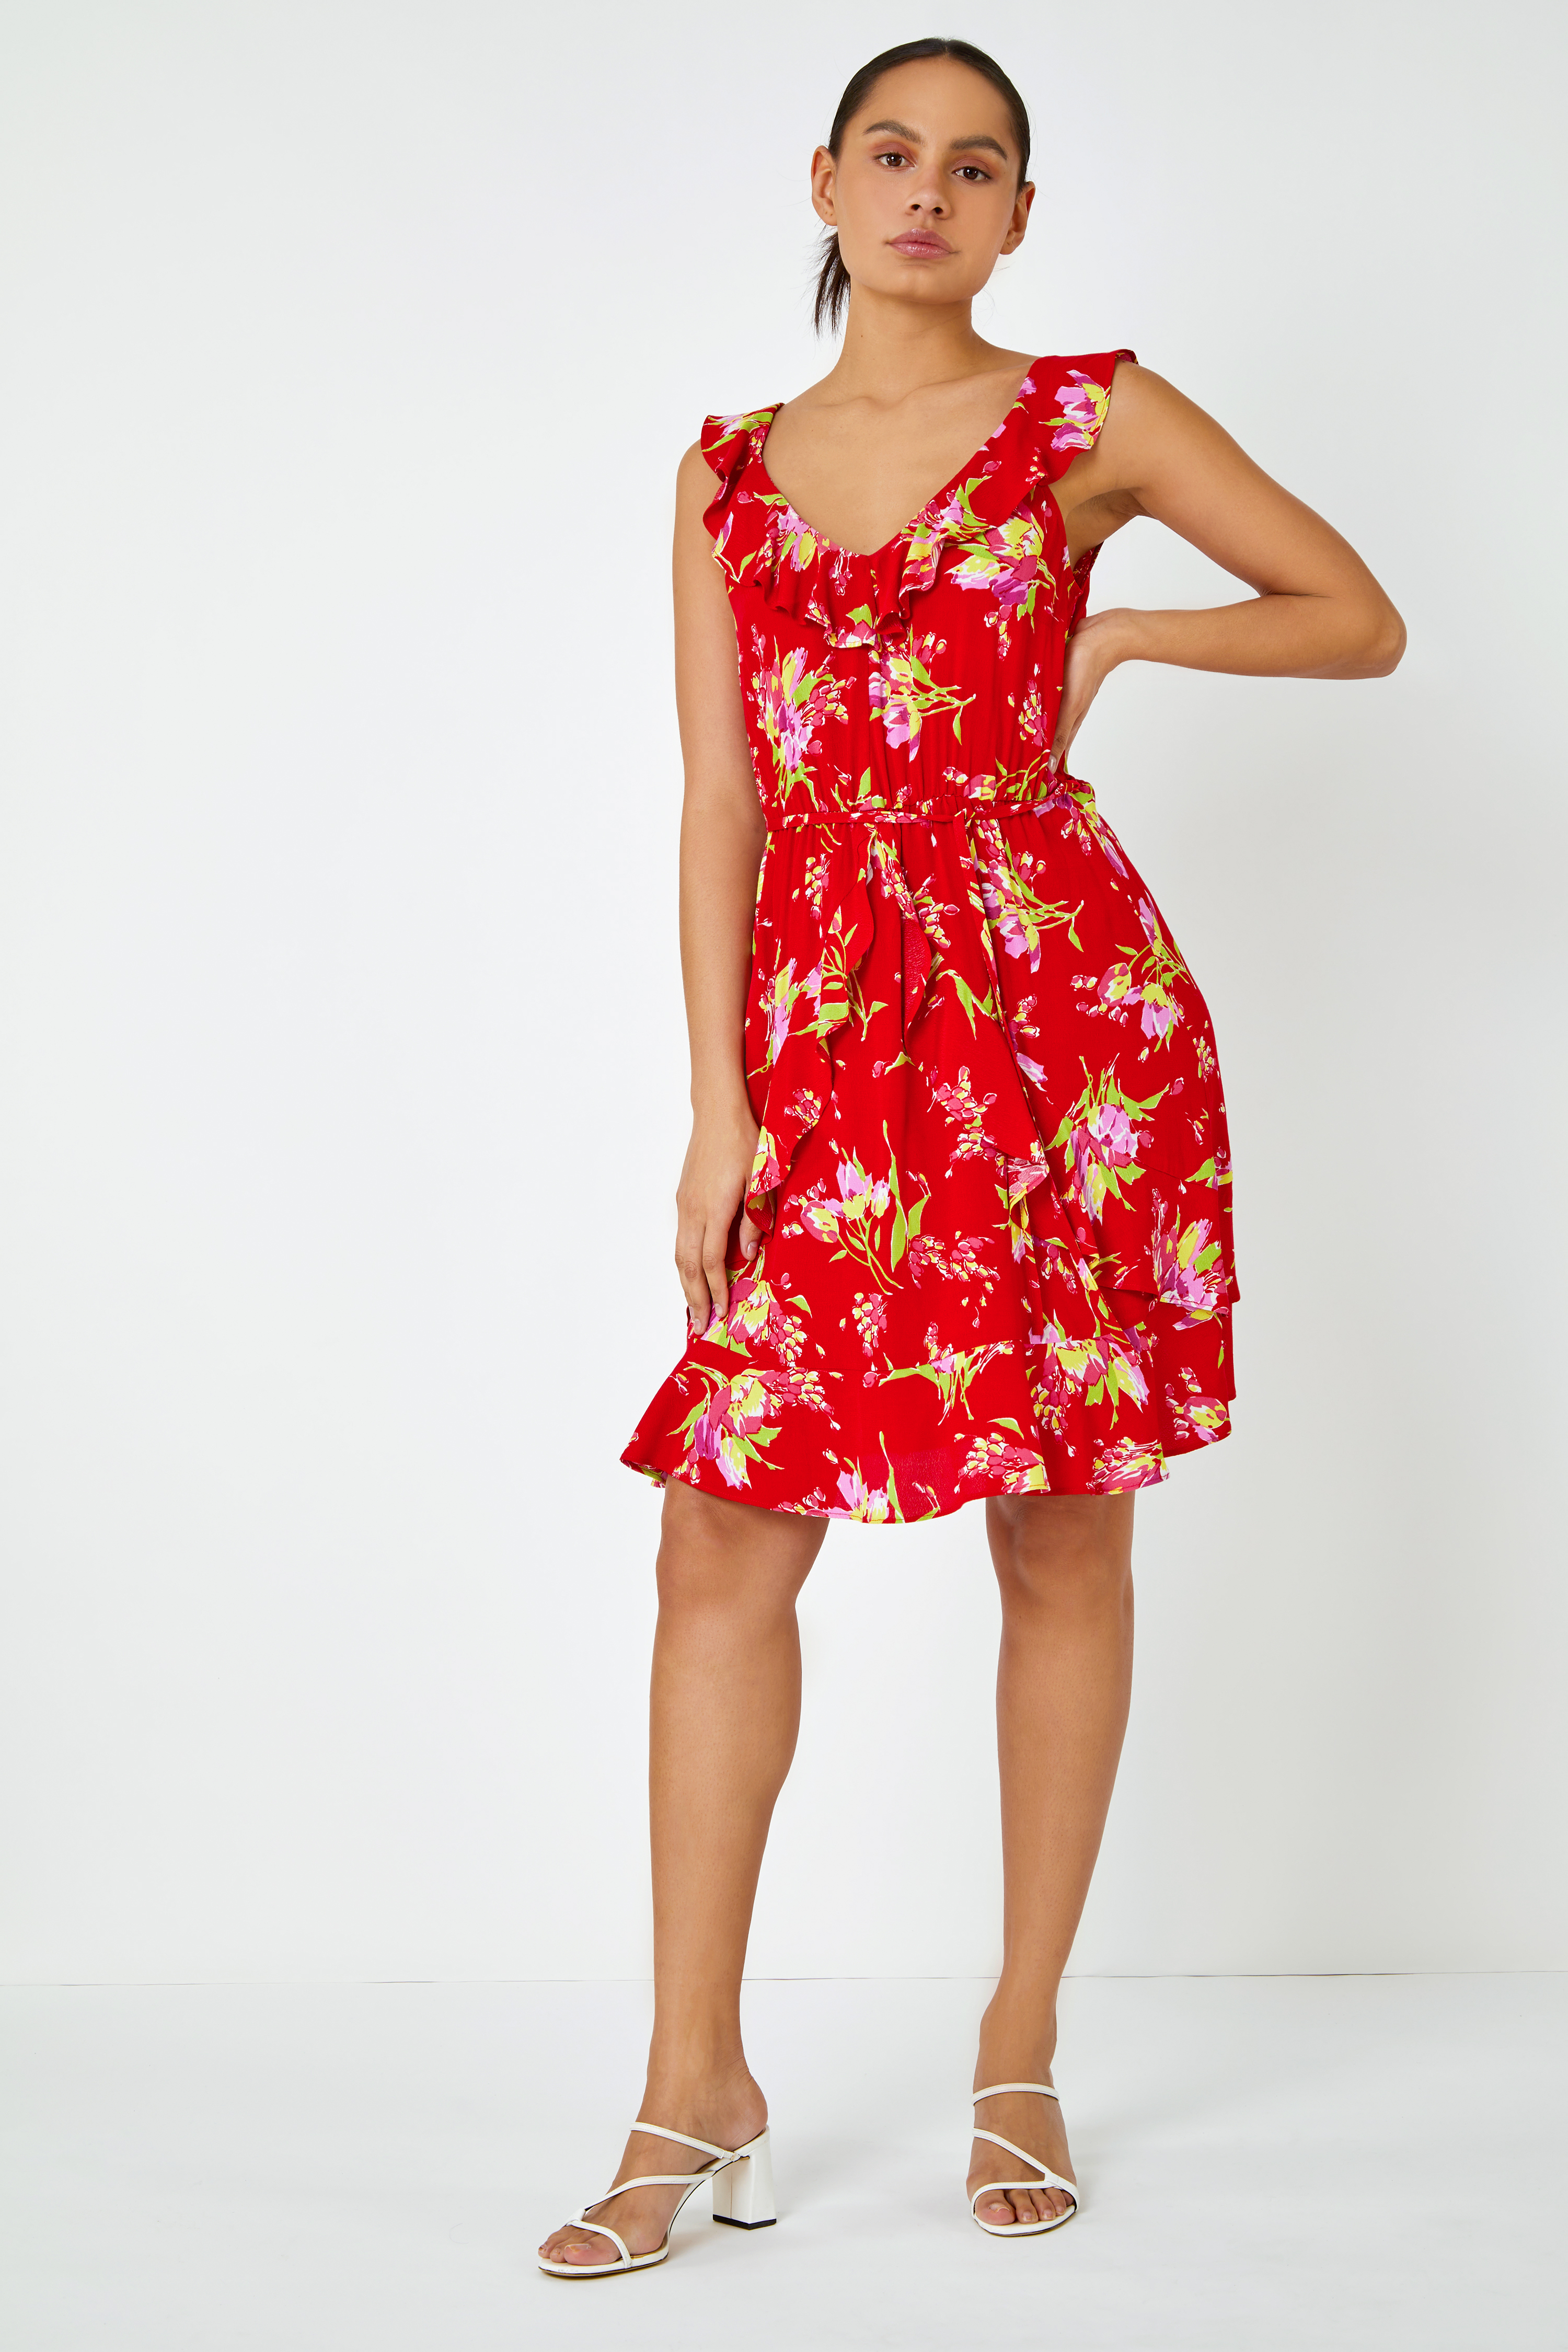 Red Floral Frill Detail Fit & Flare Dress, Image 4 of 5